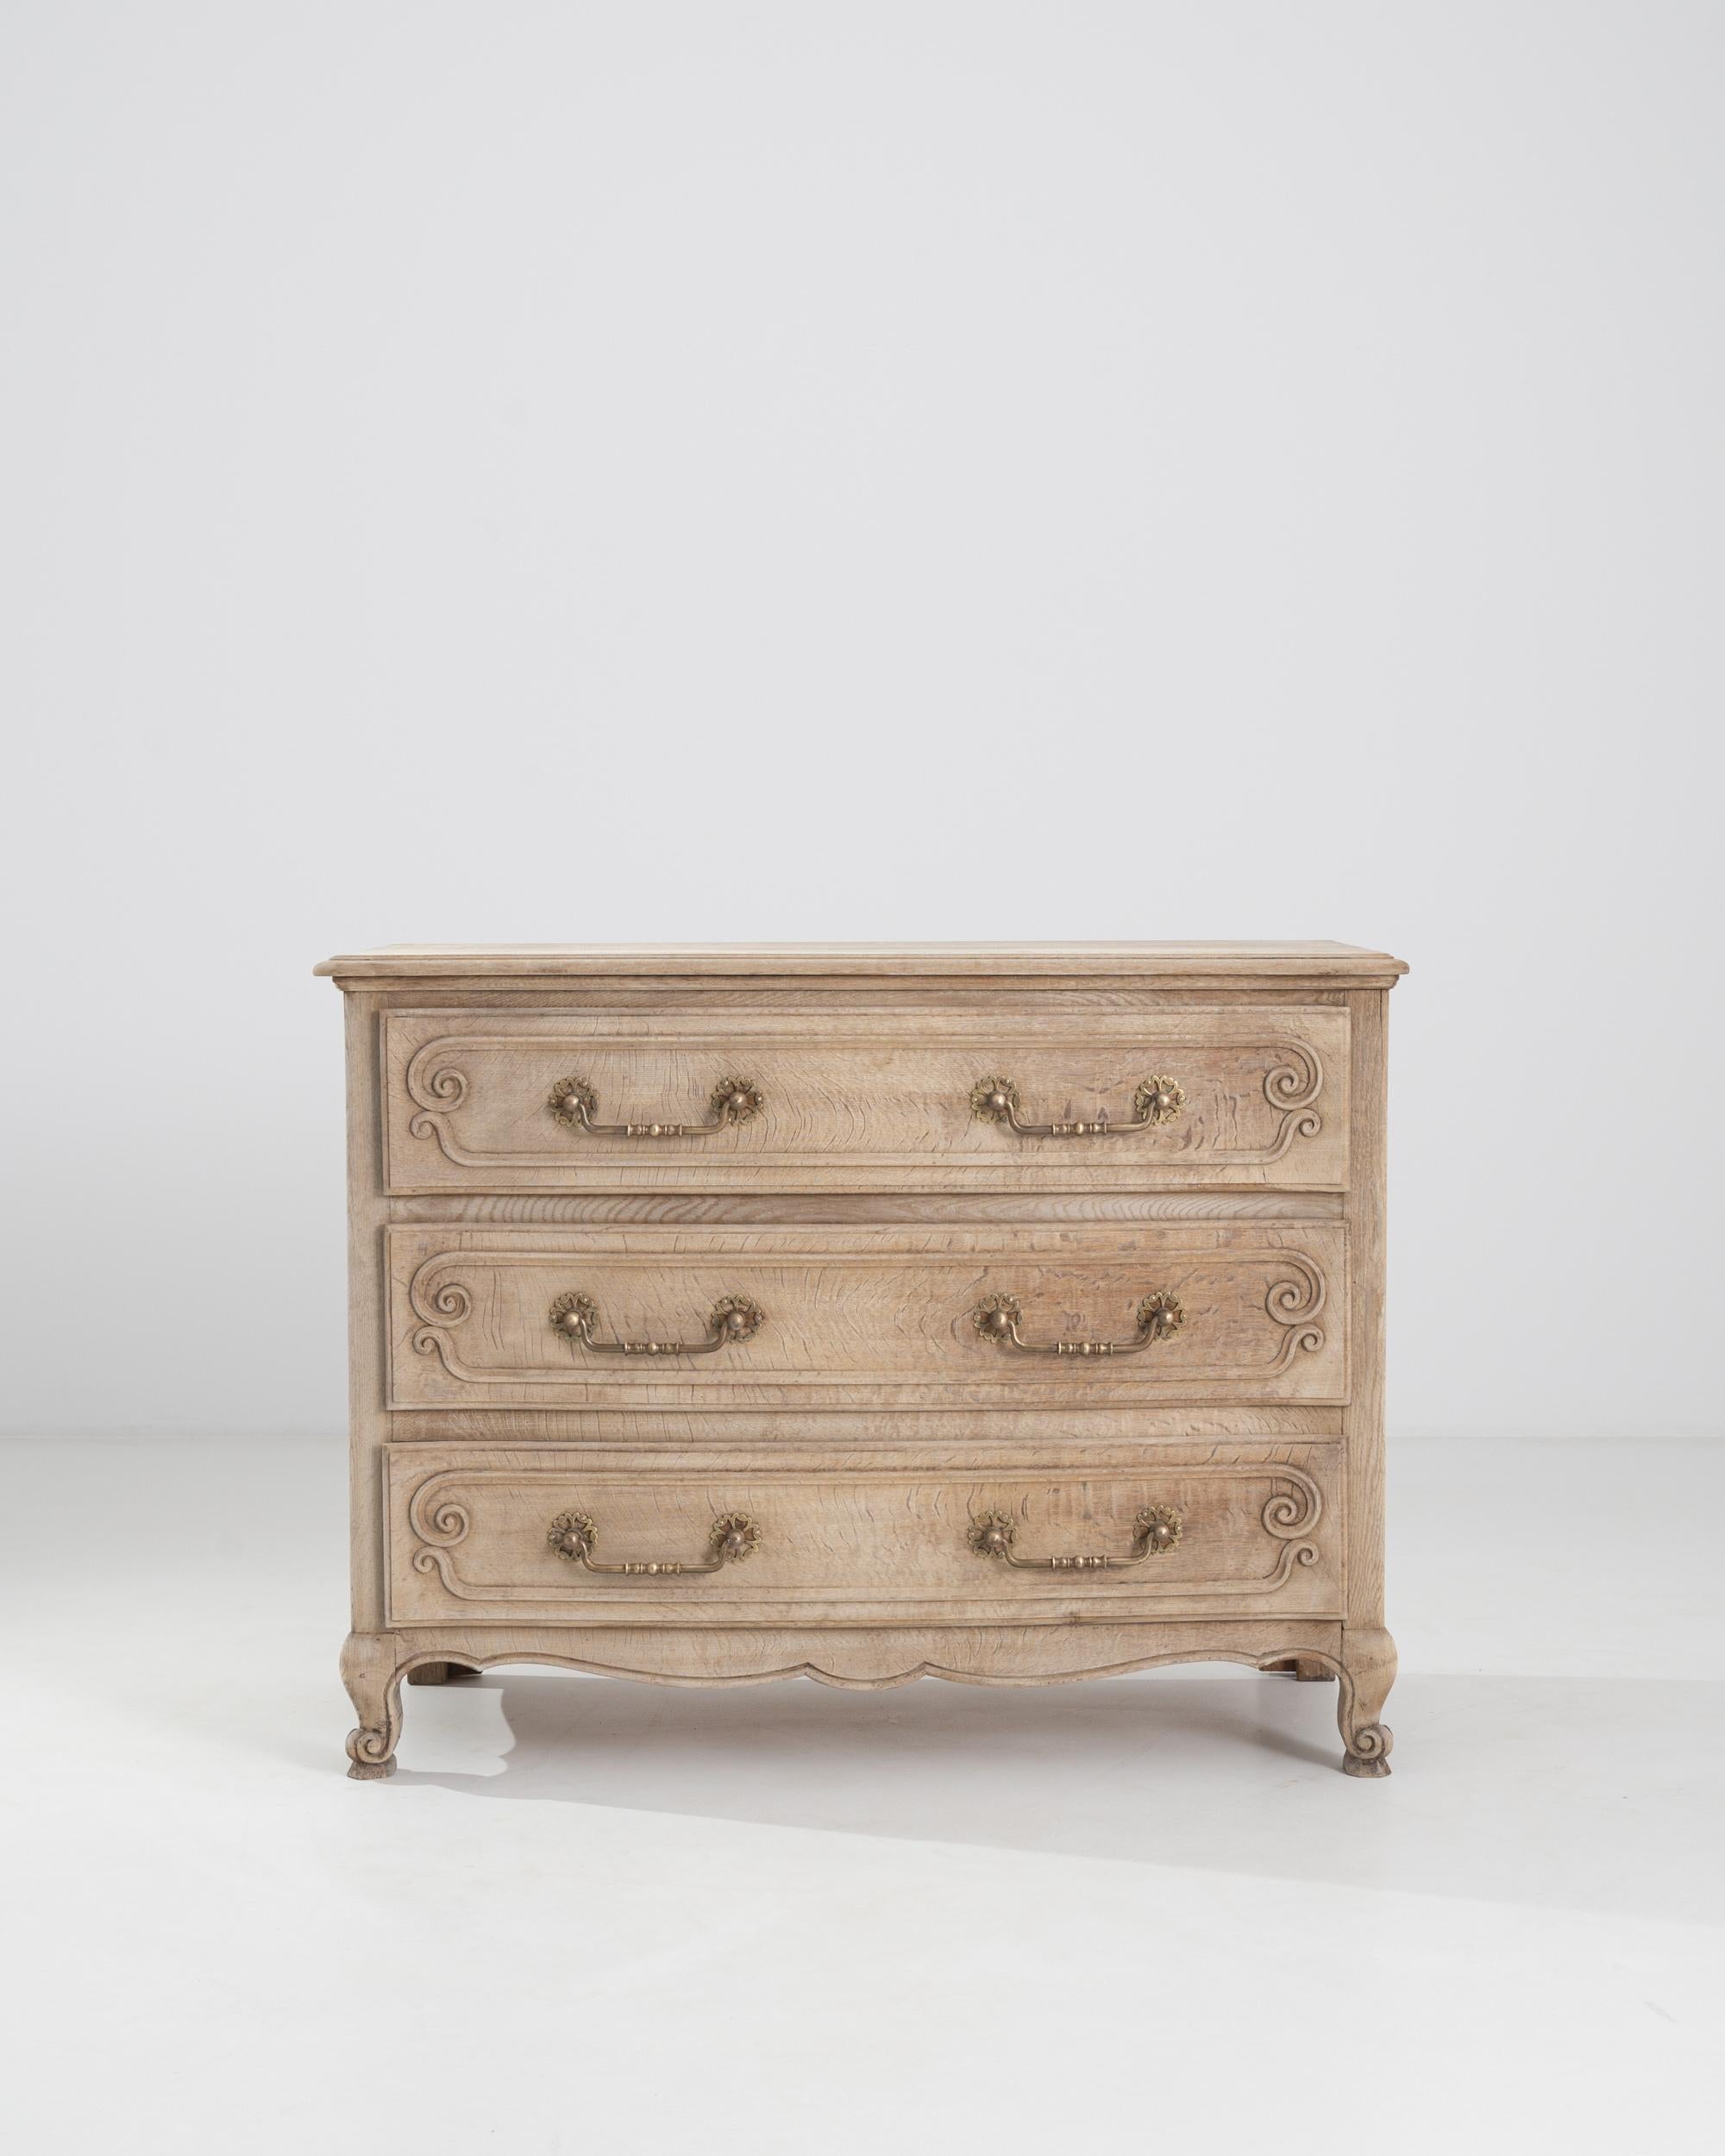 A bleached oak chest of drawers from 20th century Belgium. This chest wields three spacious drawers, a flowing wave runs along its bottom edge, flanked by carefully carved scroll motifs along its front-facing feet. A sensitive bleaching process has